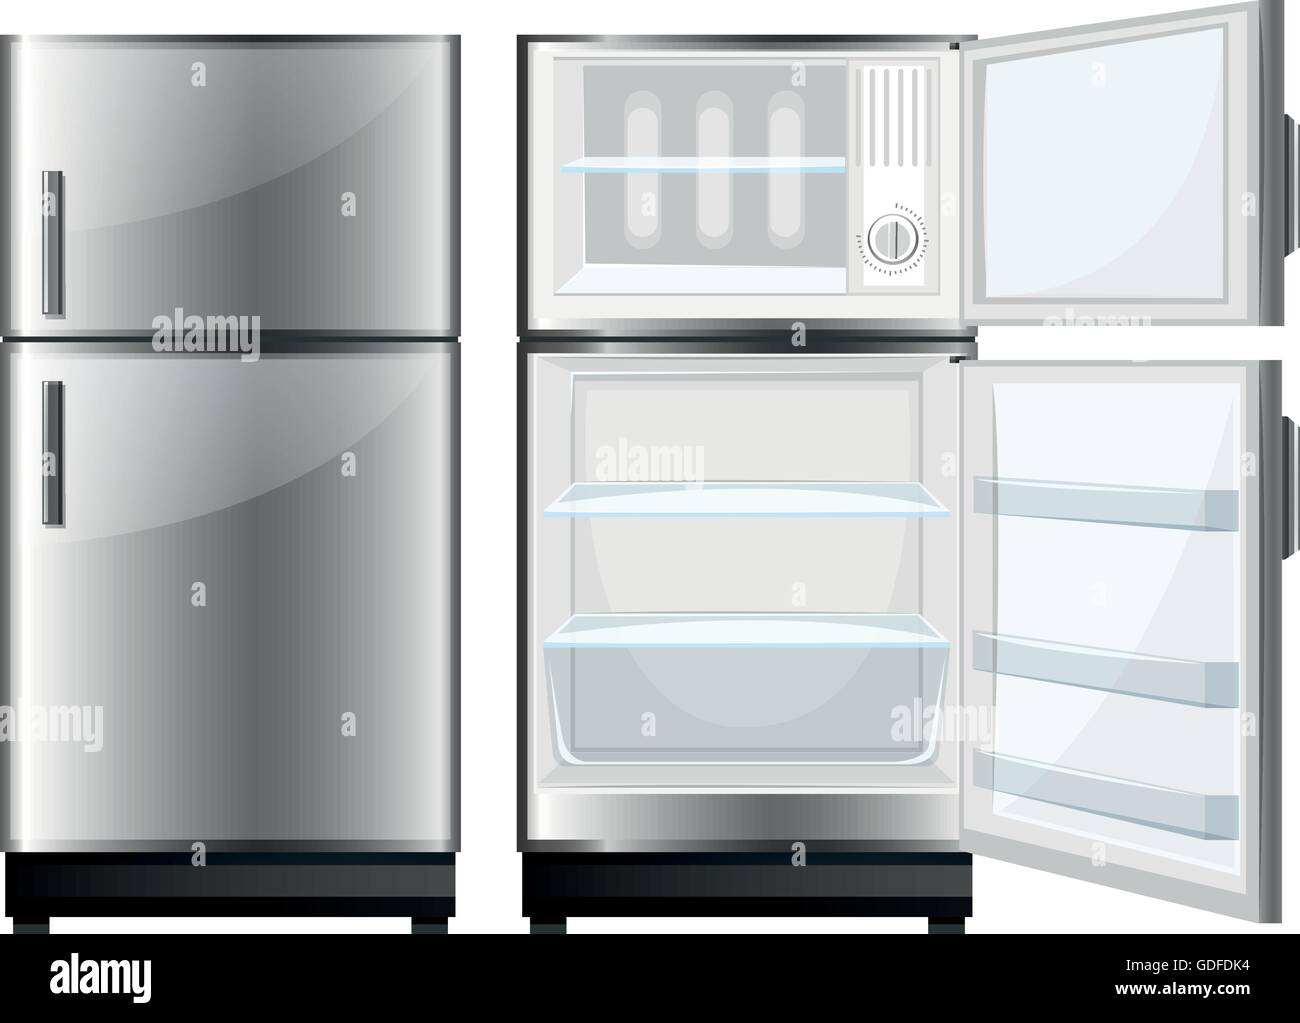 Refridgerator with closed and opened door illustration Stock Vector